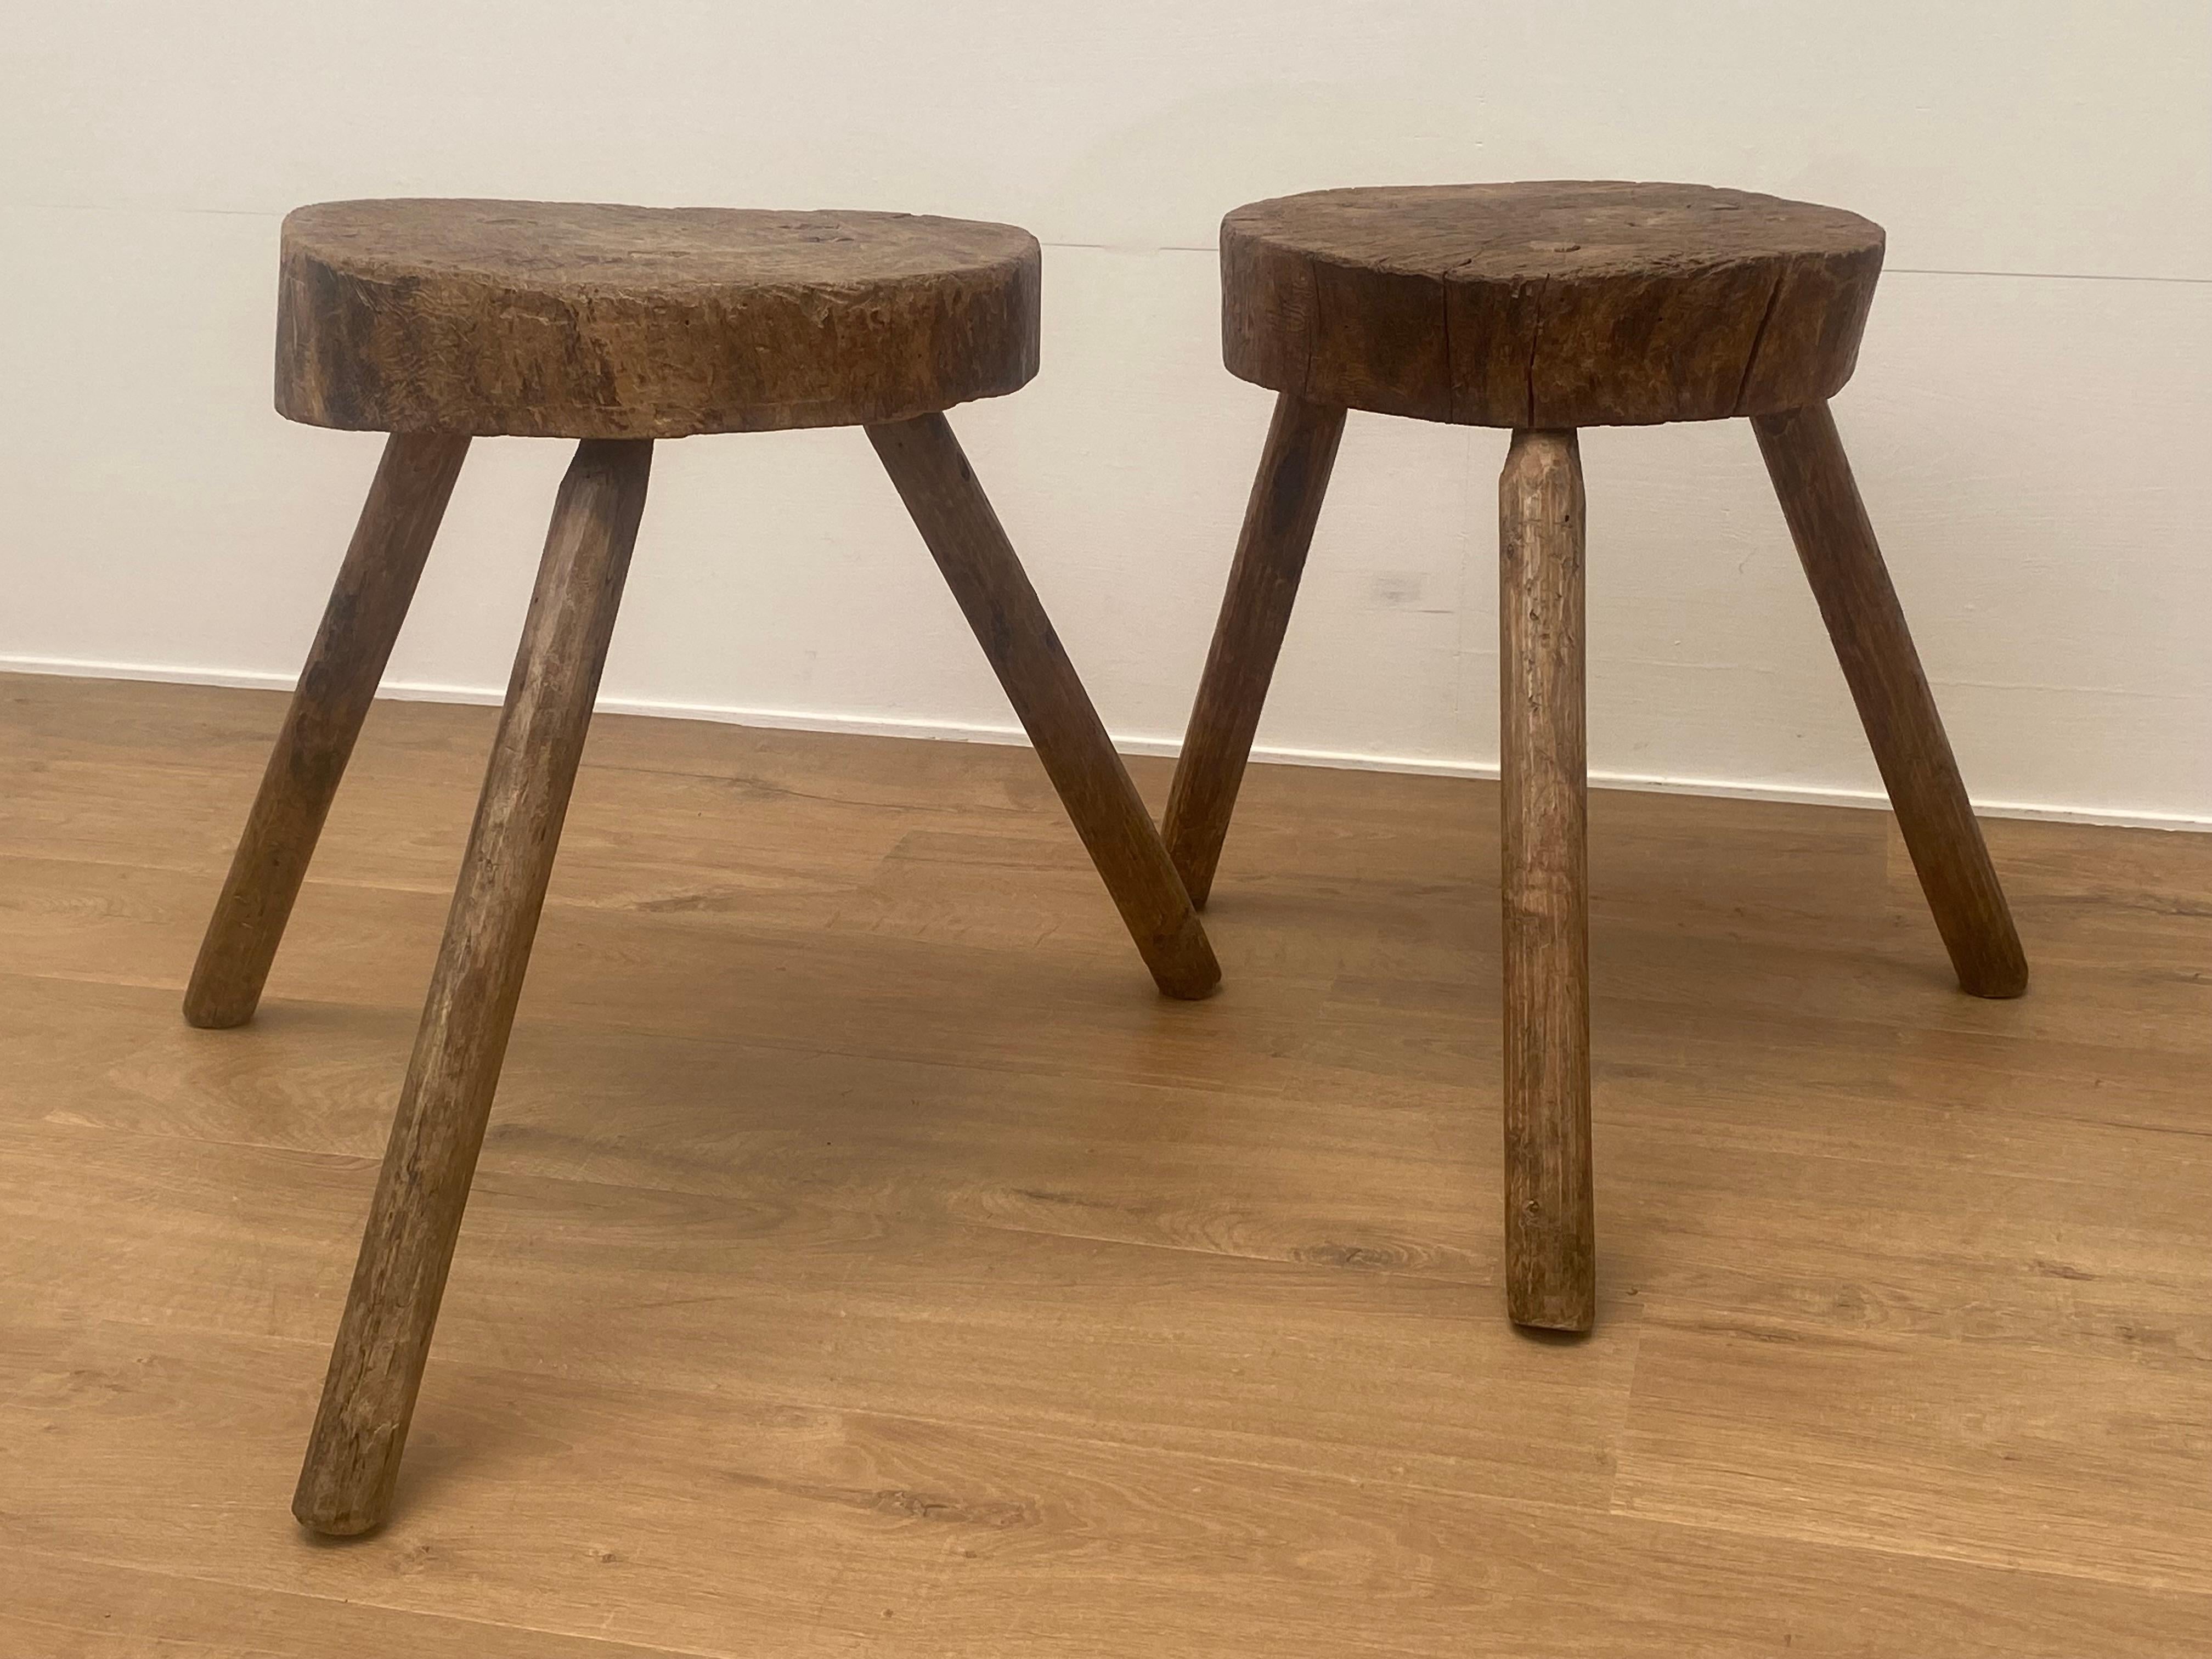 Brutalist pair of Spanish Industrial working tables or stools,
to be used for different purposes, seating or as a table,
the stools have a beautiful old patina and shine of the Blond Fruitwood,
very decorative objects